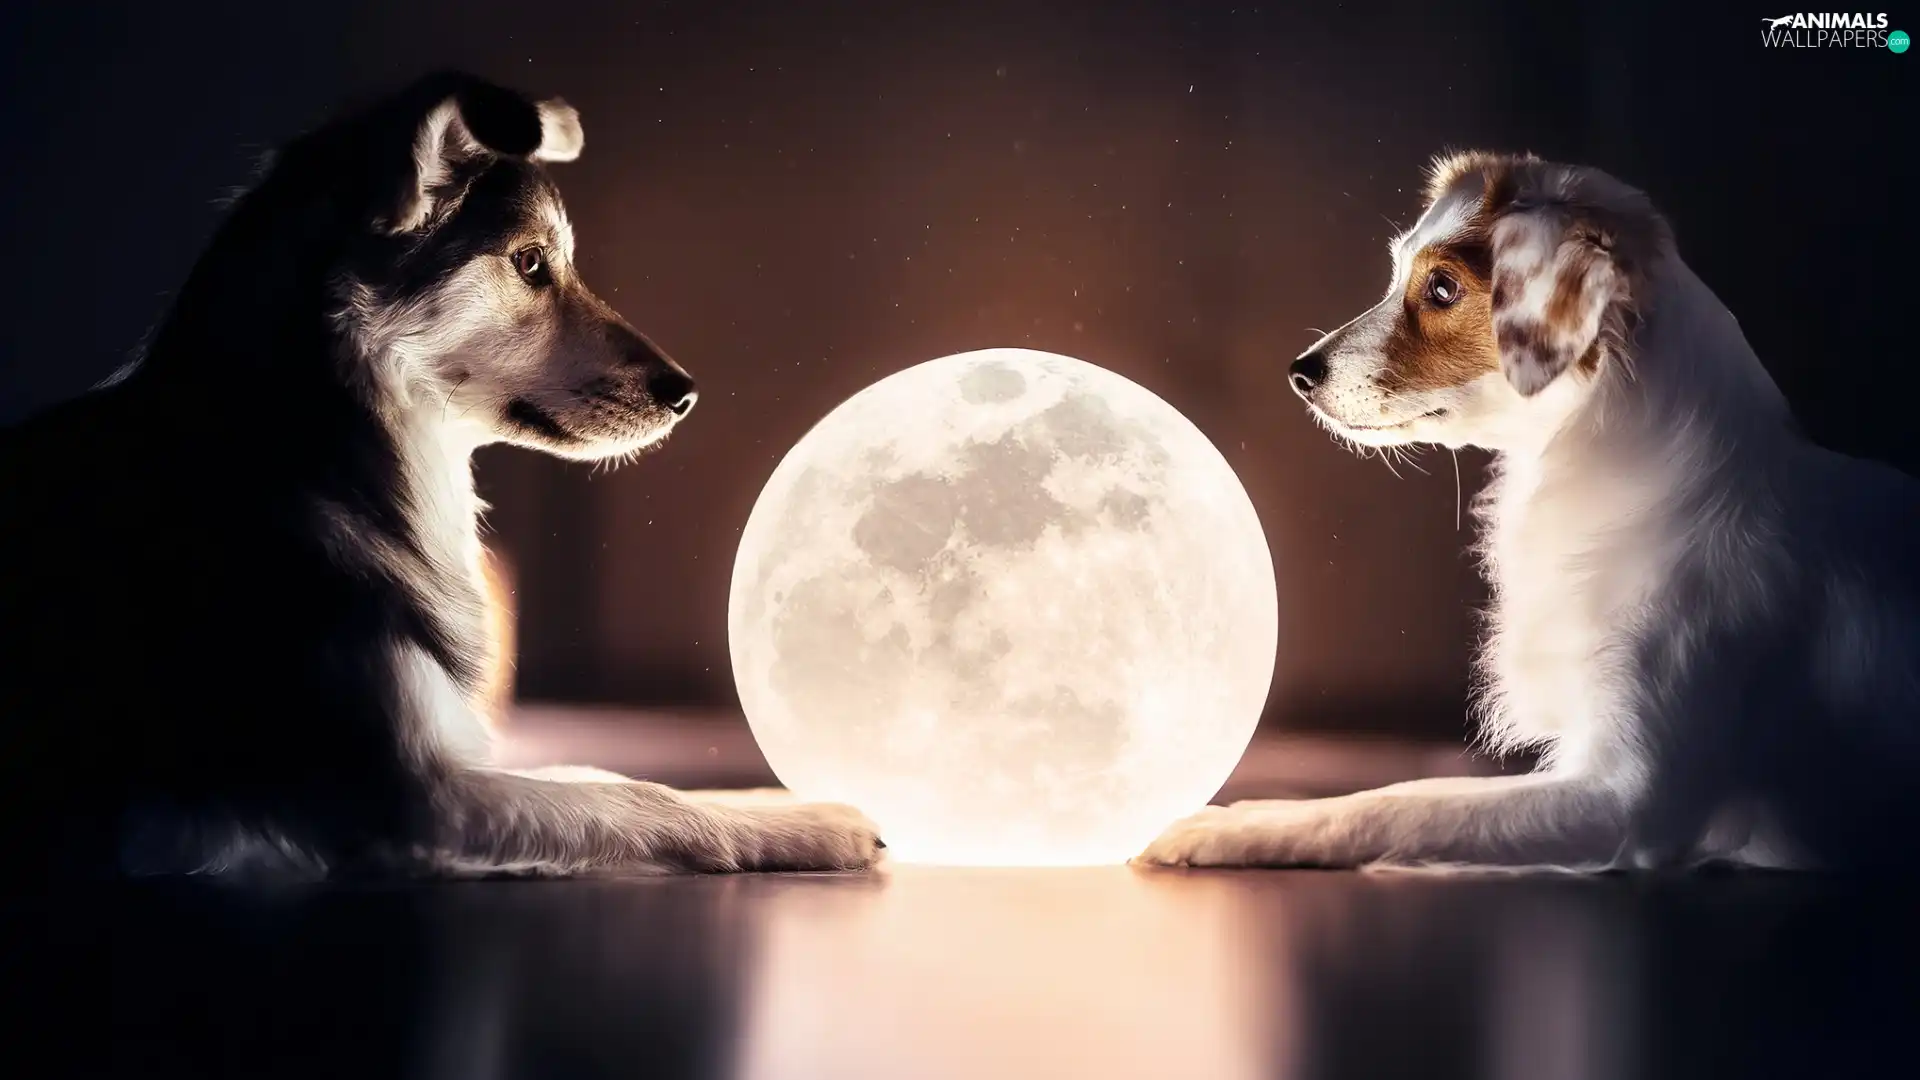 Two cars, moon, Orb, Dogs